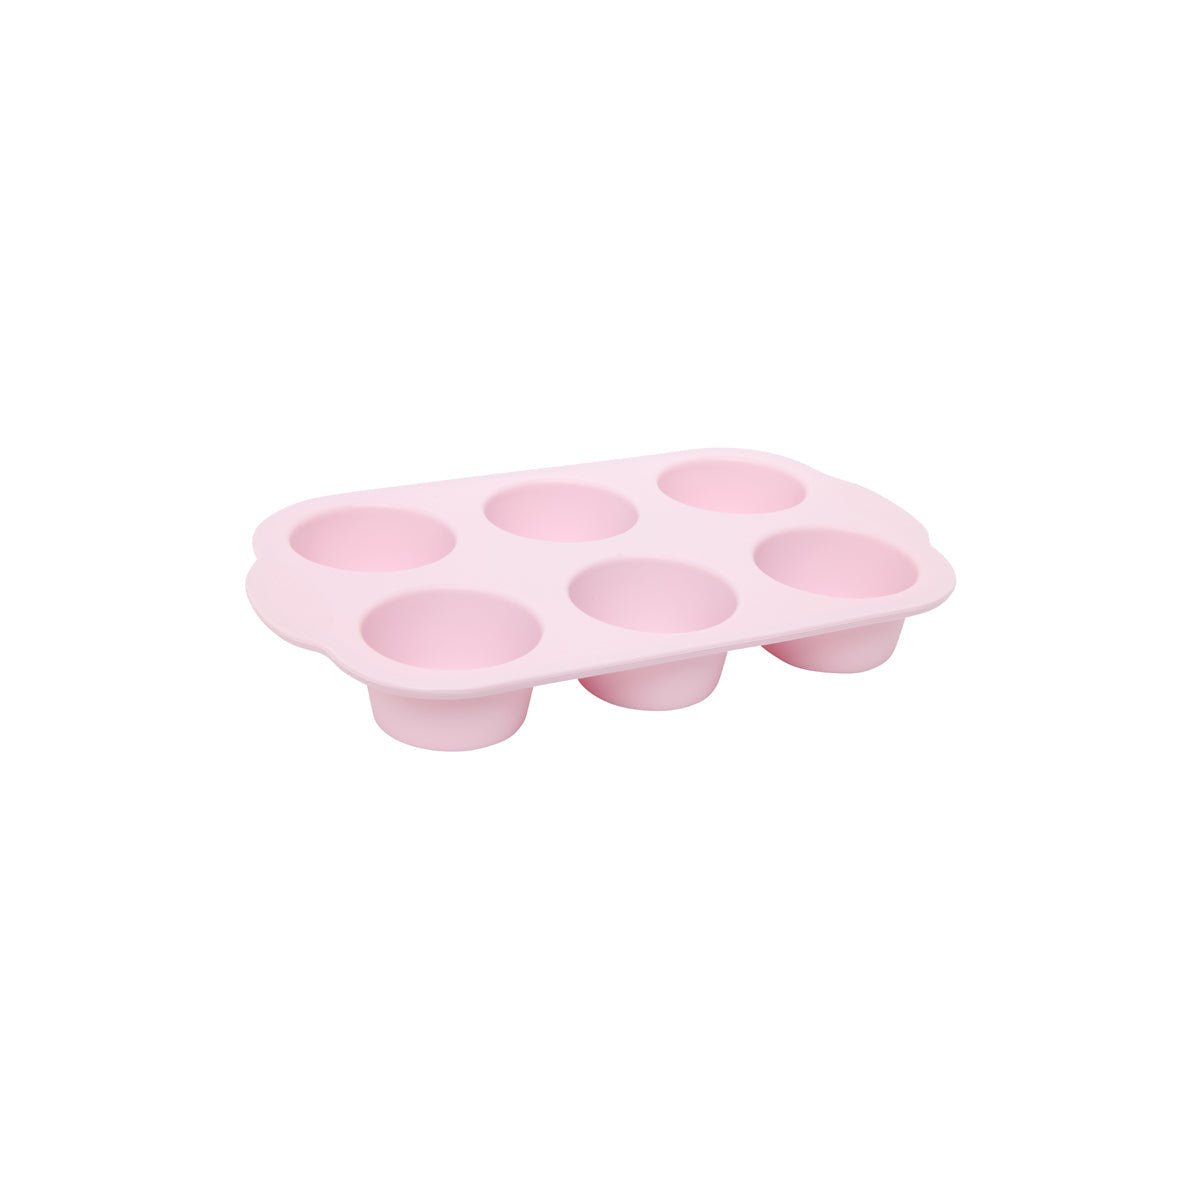 WLT40245 WILTSHIRE Silicone 6 Cup Muffin Pan Tomkin Australia Hospitality Supplies